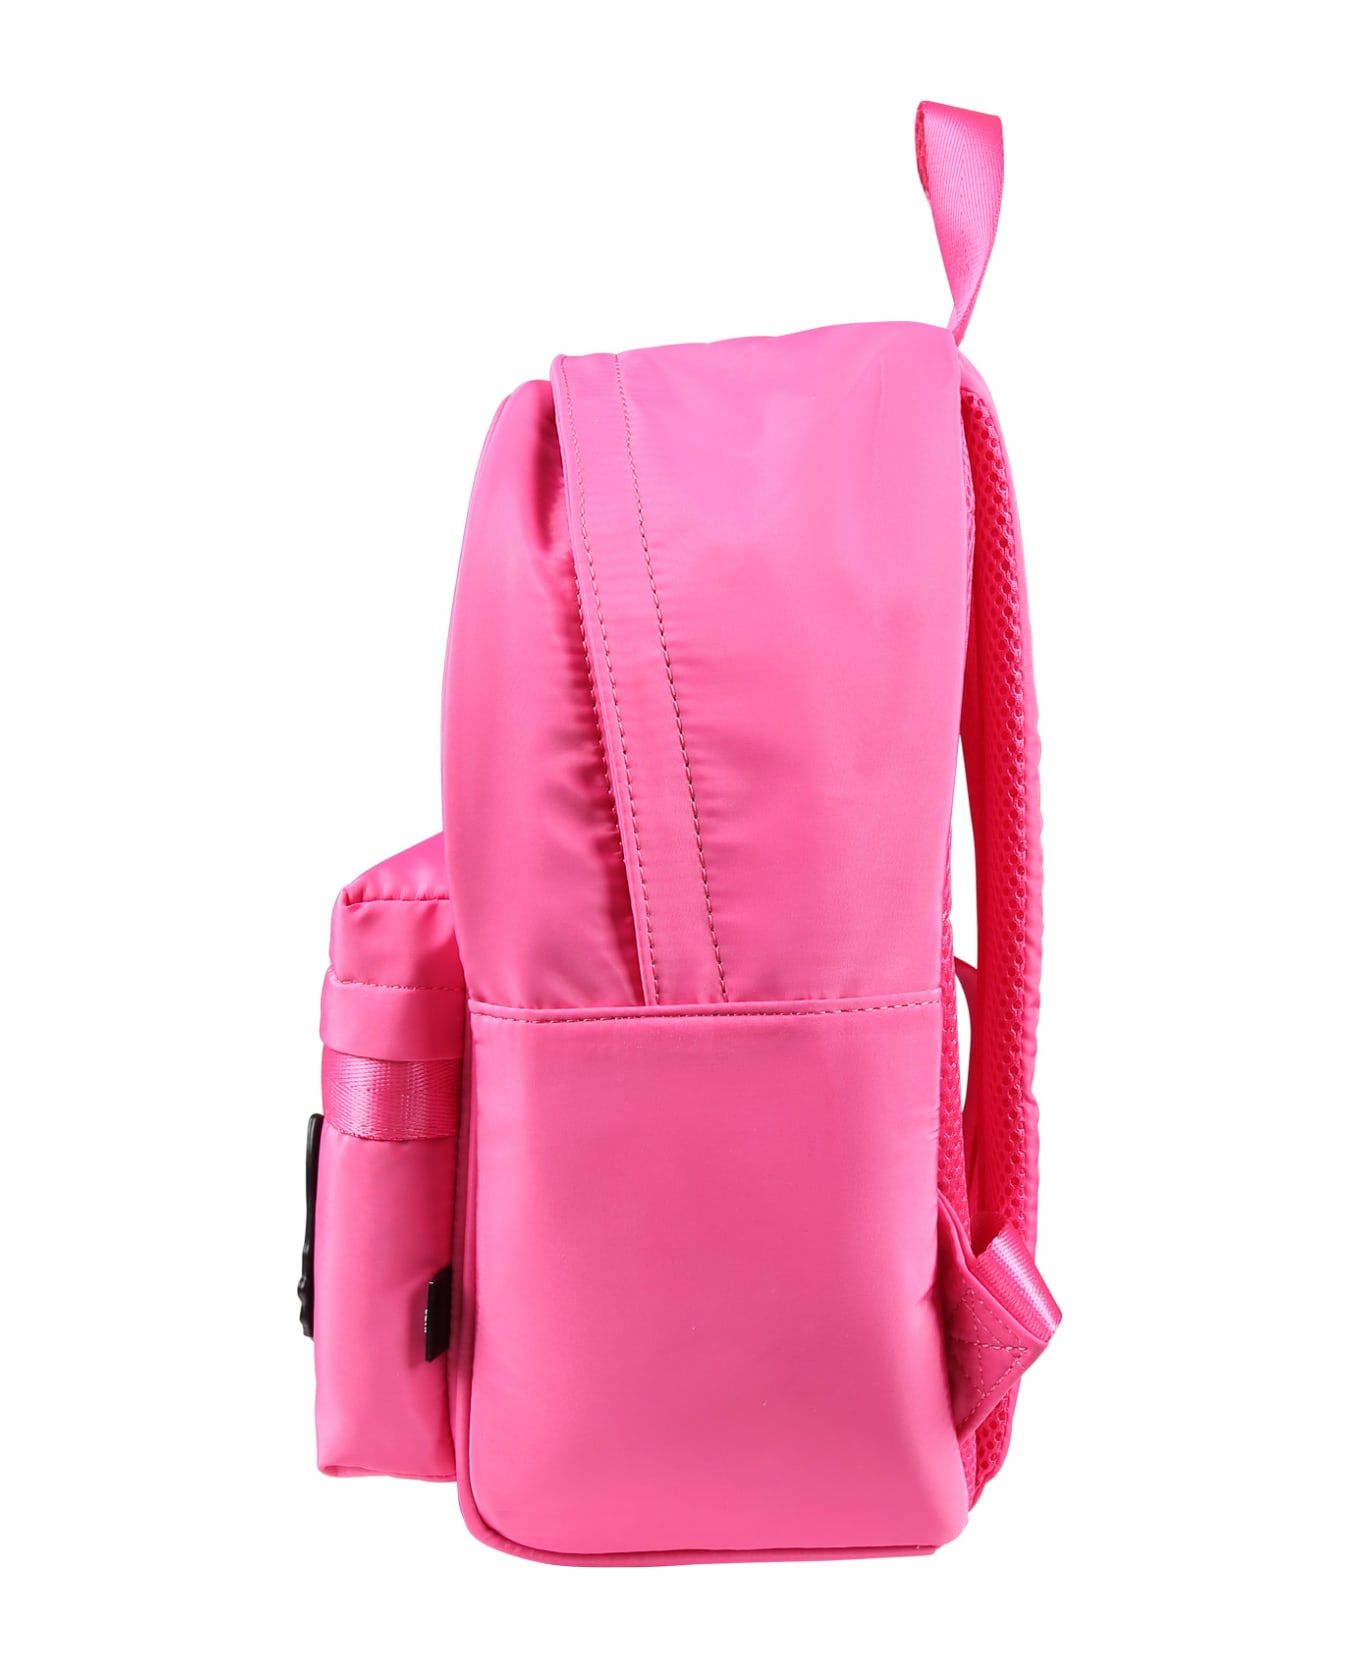 Karl Lagerfeld Kids Fuchsia Backpack For Girl With Logo And Choupette - Fuchsia アクセサリー＆ギフト